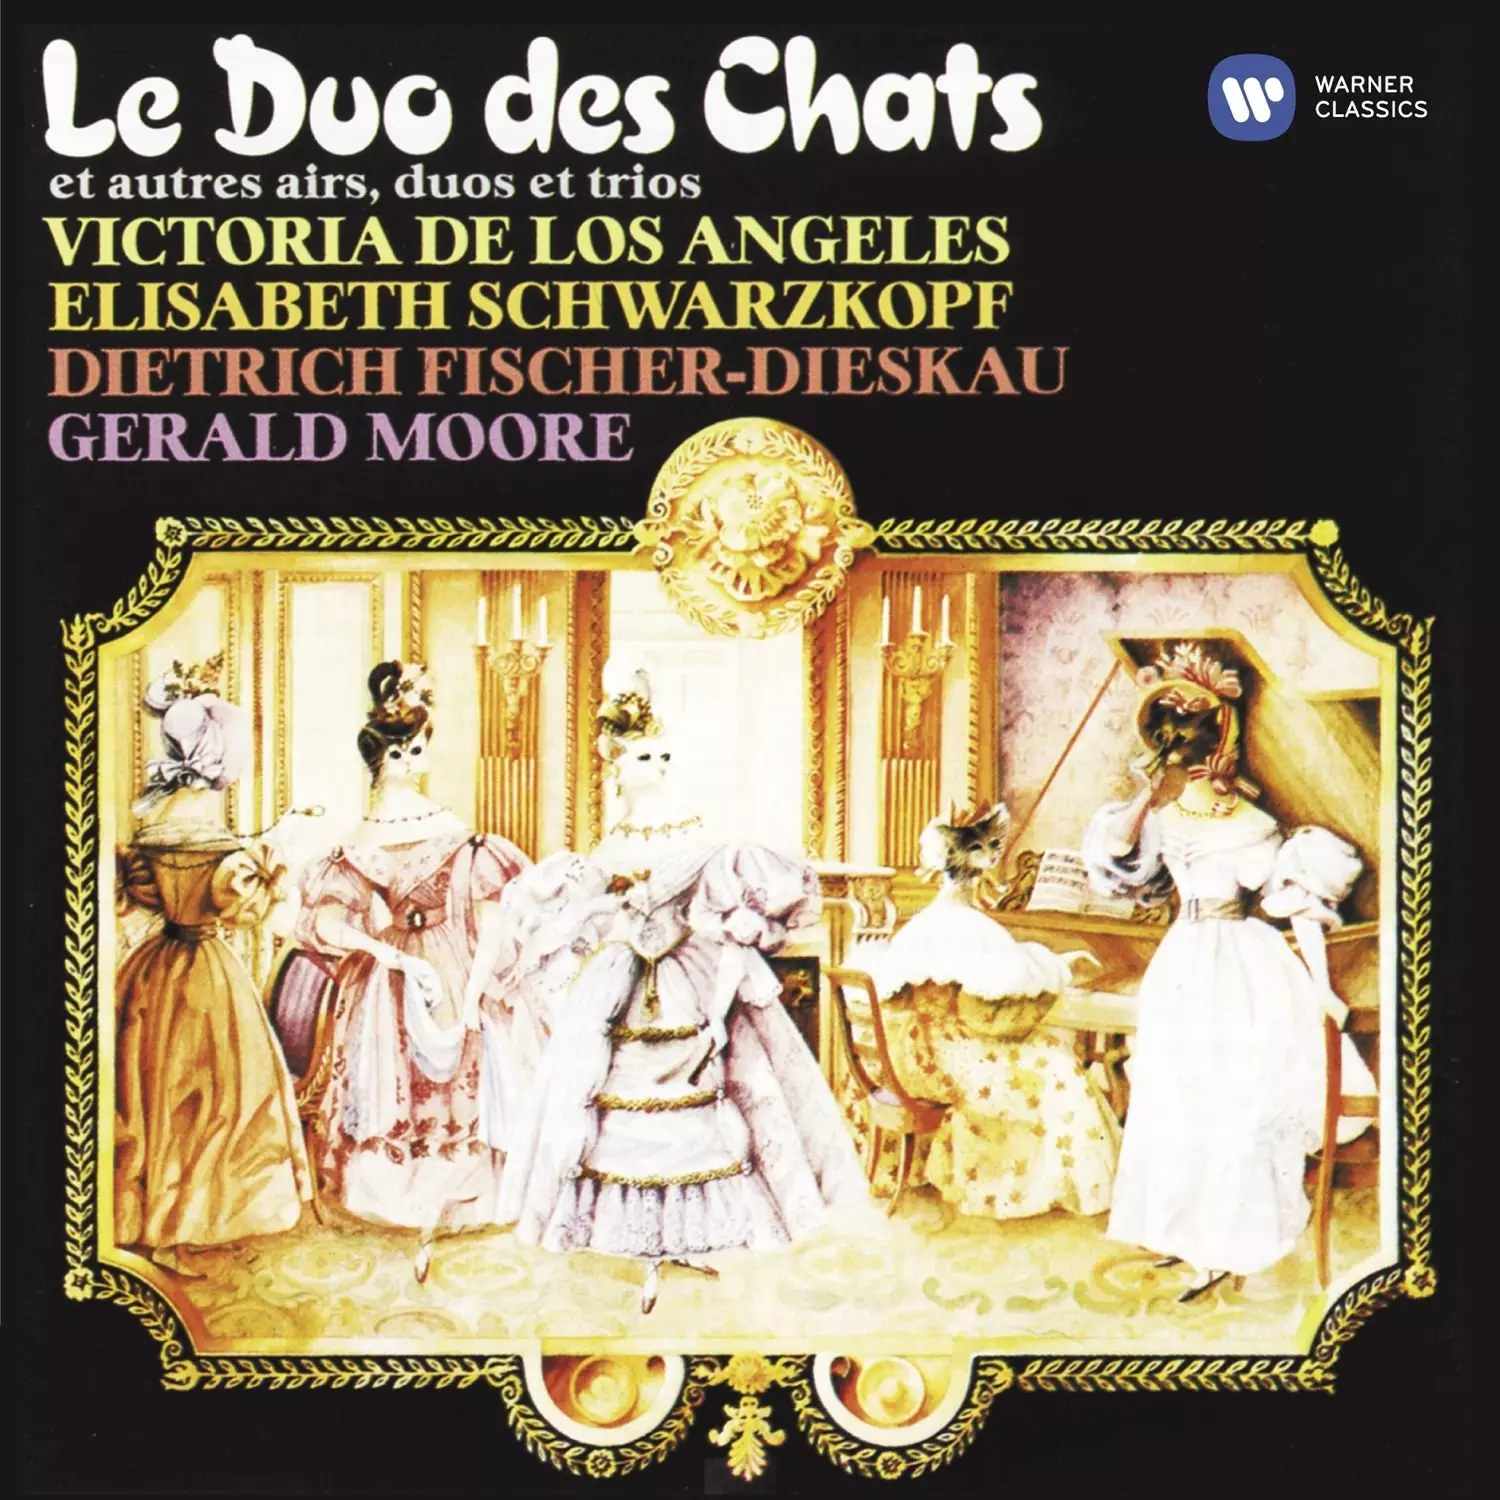 The Cats' Duet and other arias, duets and trios